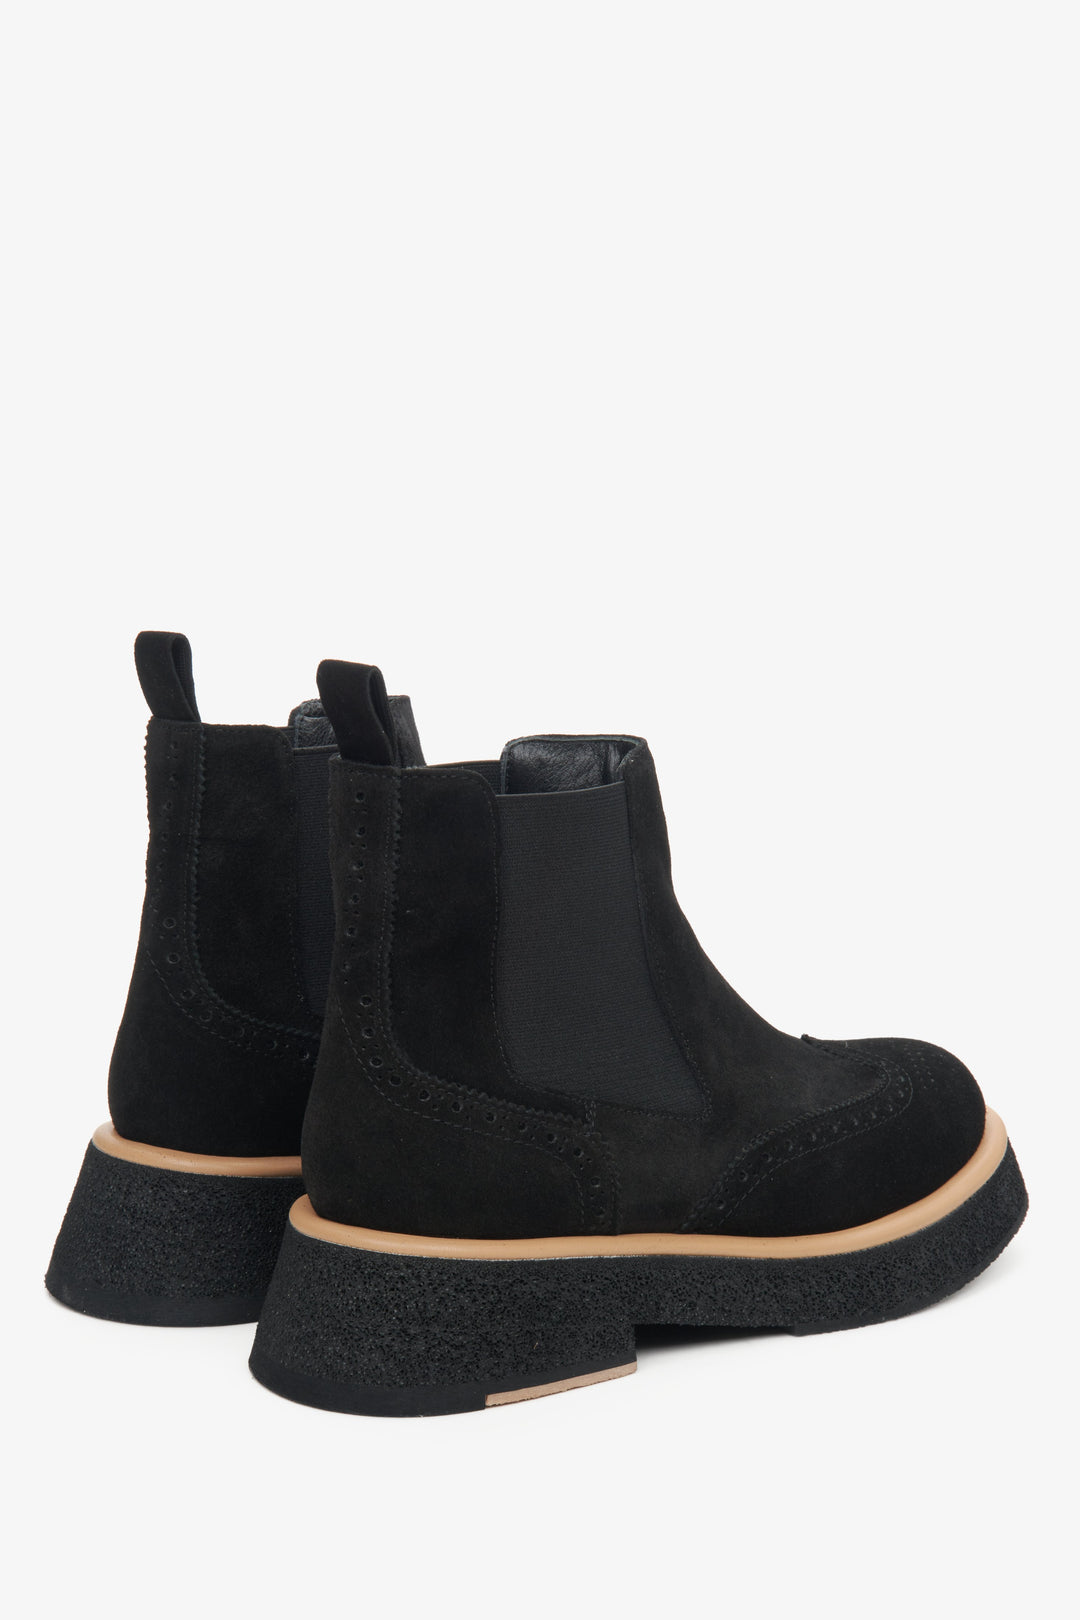 Women's black ankle boots with a comfortable heel made of natural suede by Estro - close-up on the side line and heel.